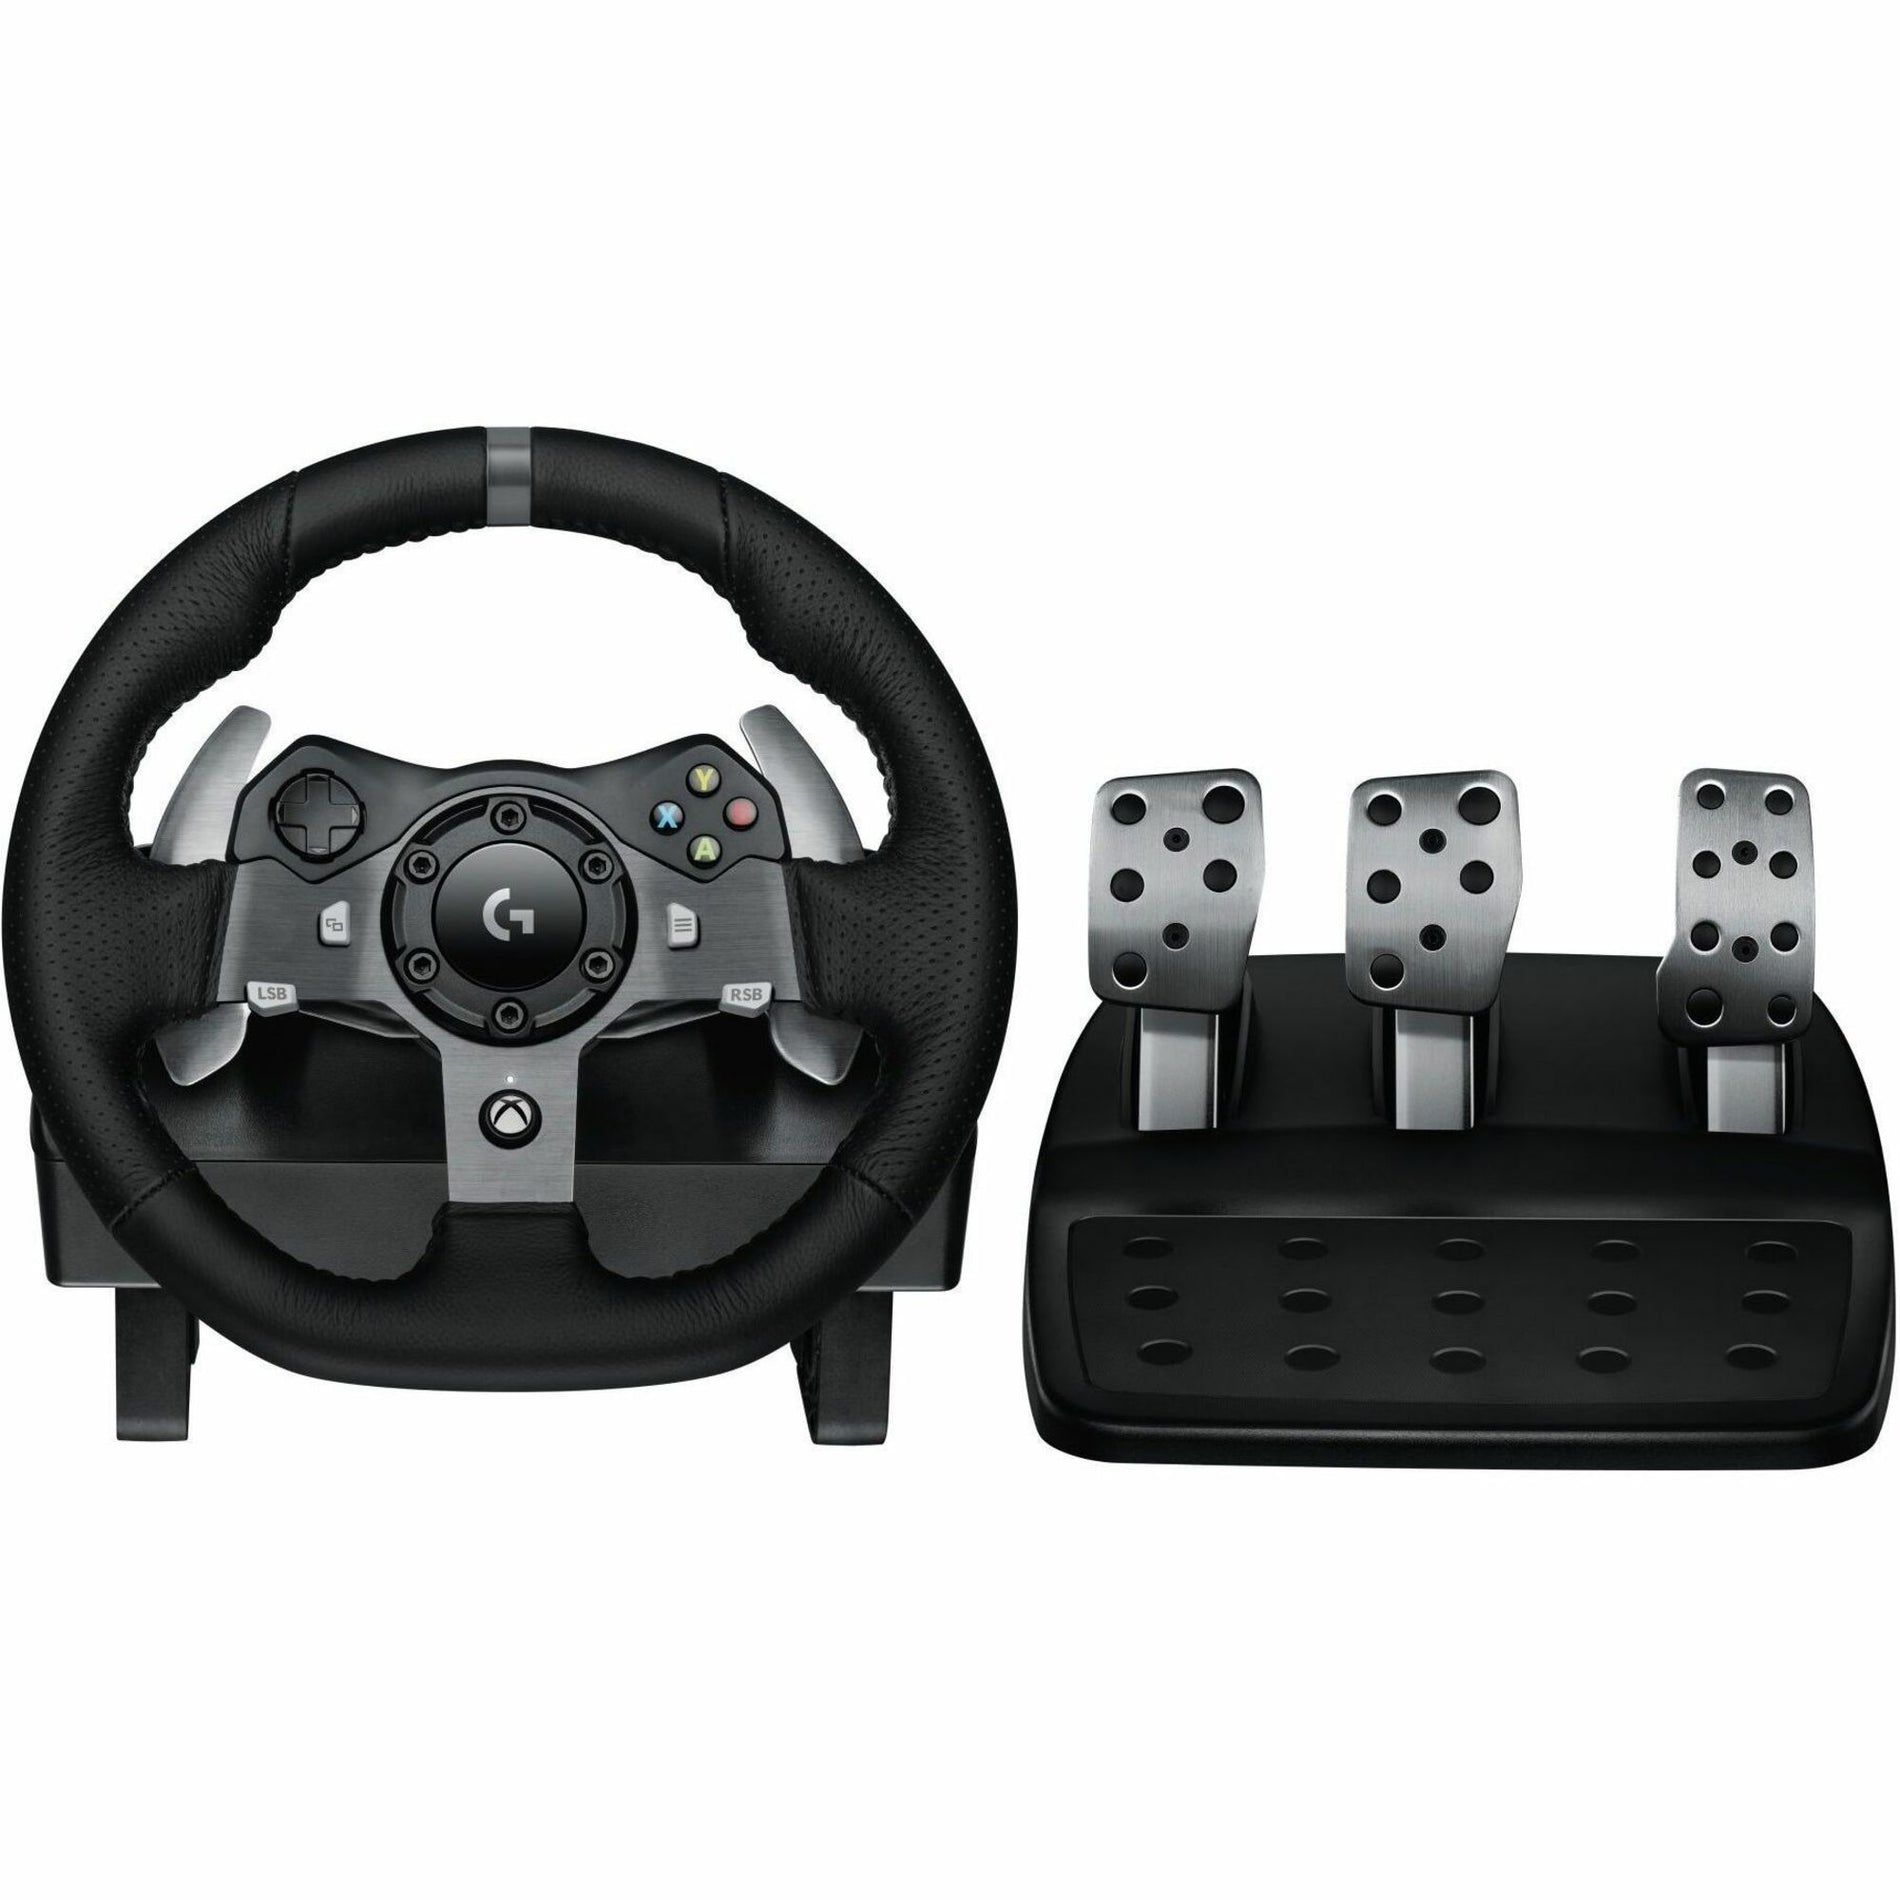 Logitech 941-000121 G920 Driving Force Racing Wheel For Xbox One And PC, 2 Year Warranty, Force Feedback